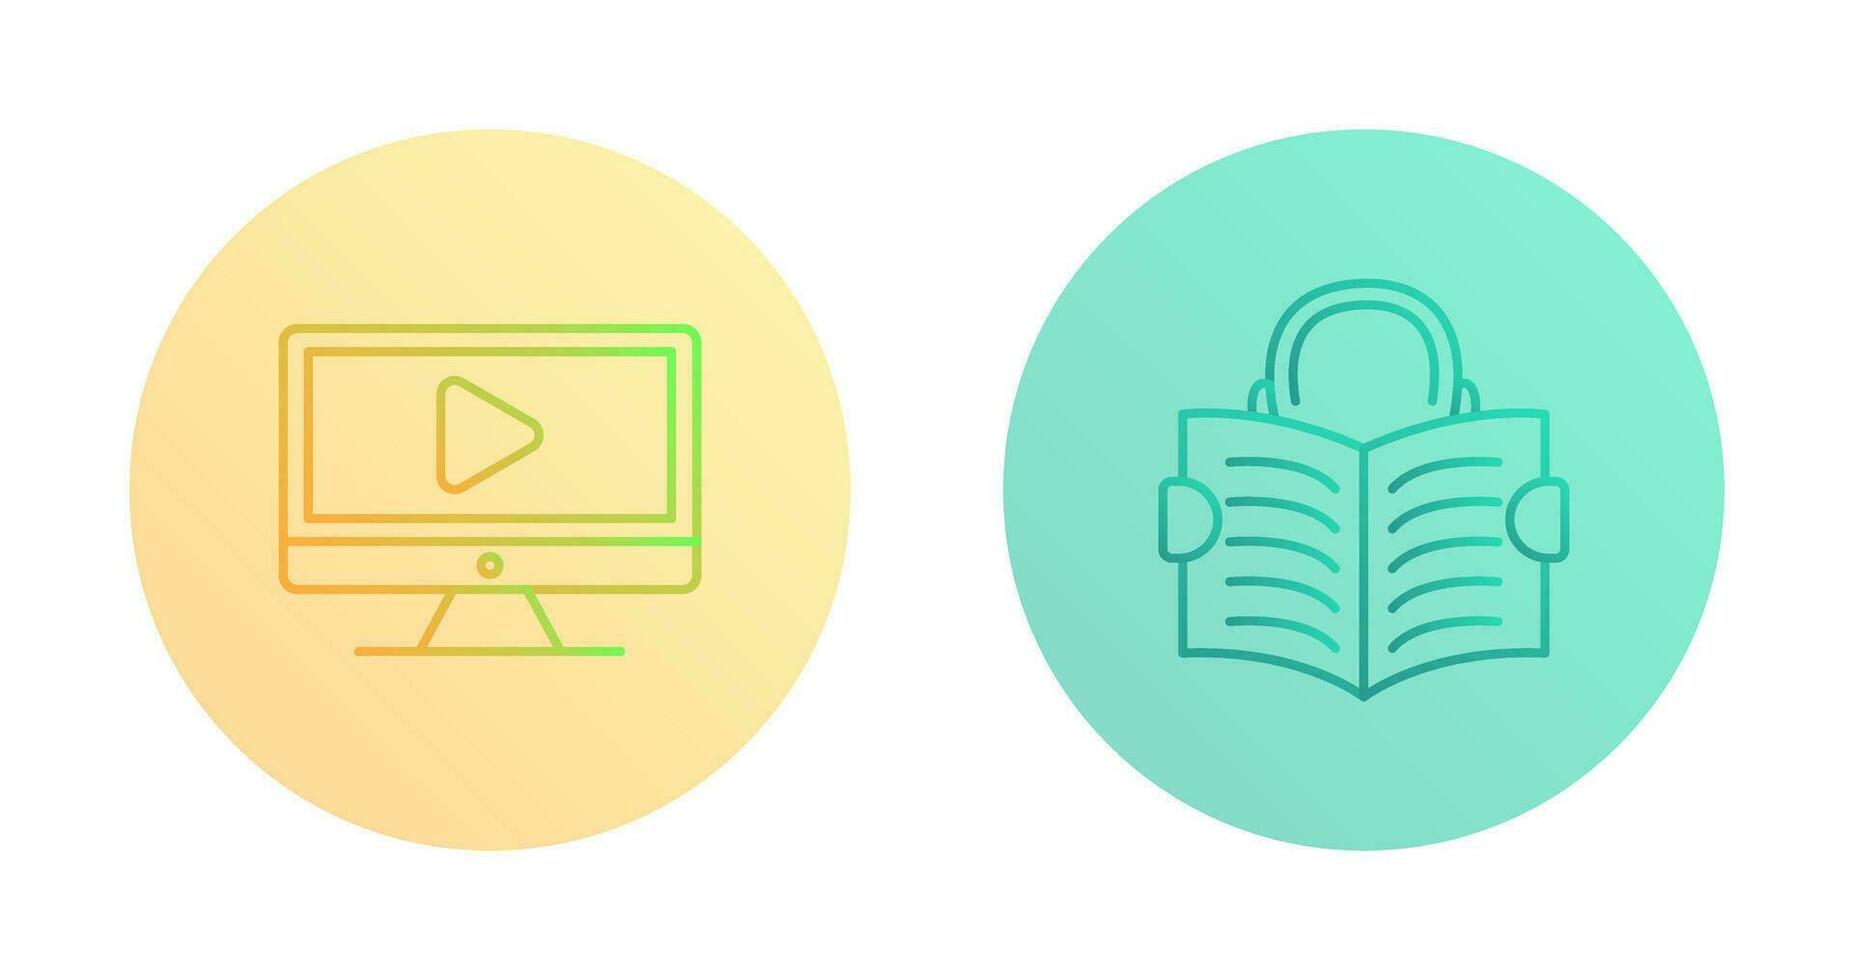 Video Lesson and Reading Icon vector